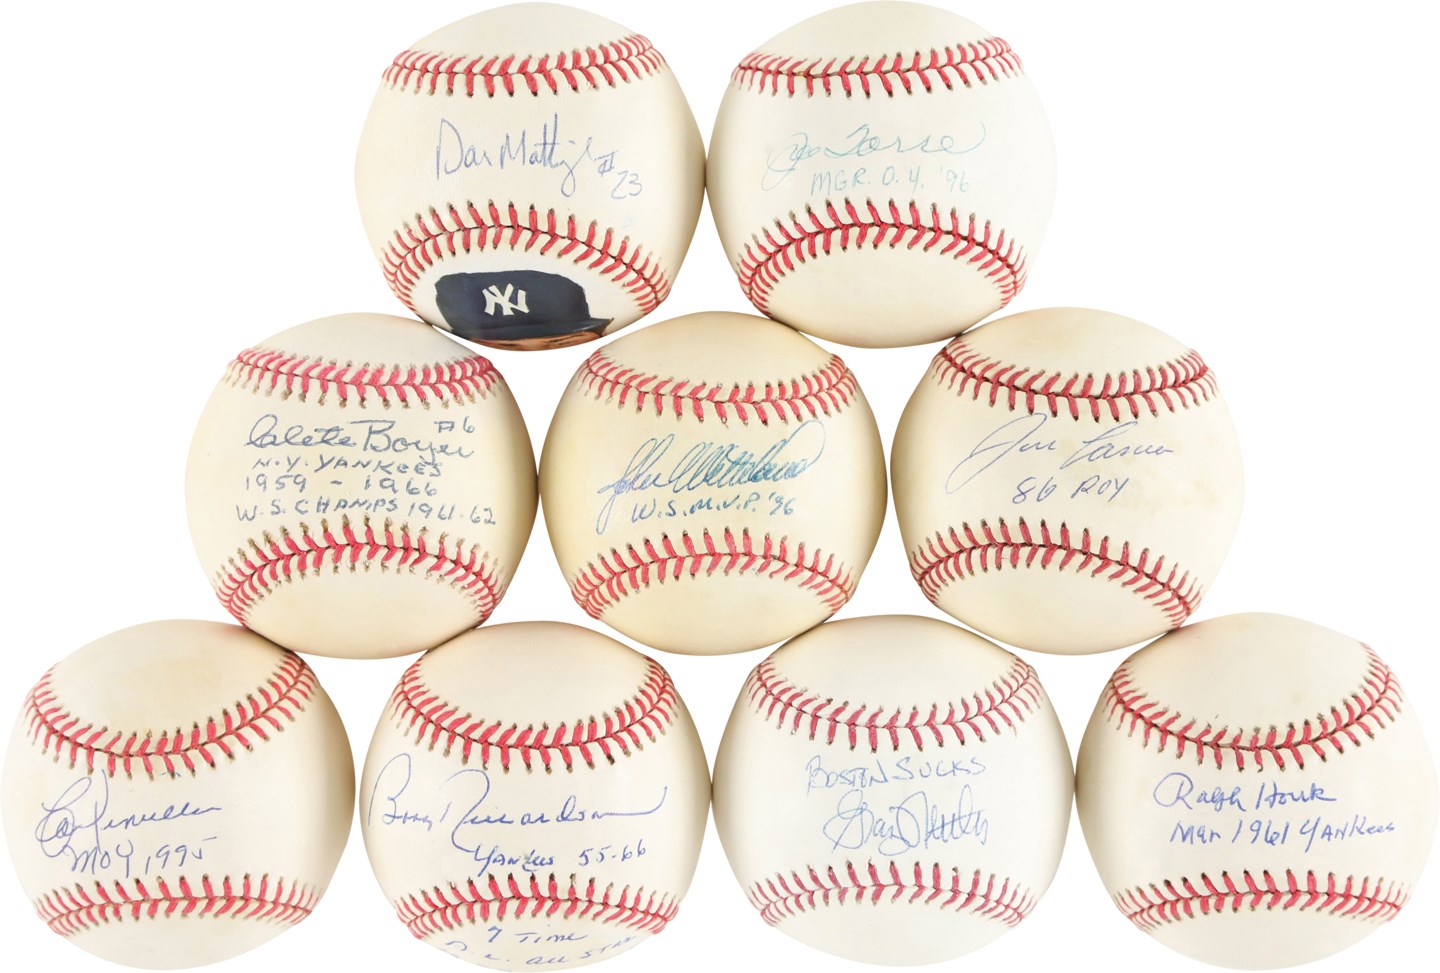 Baseball Autographs - New York Yankees Signed Inscribed Baseball Collection w/1961 World Champions (30)